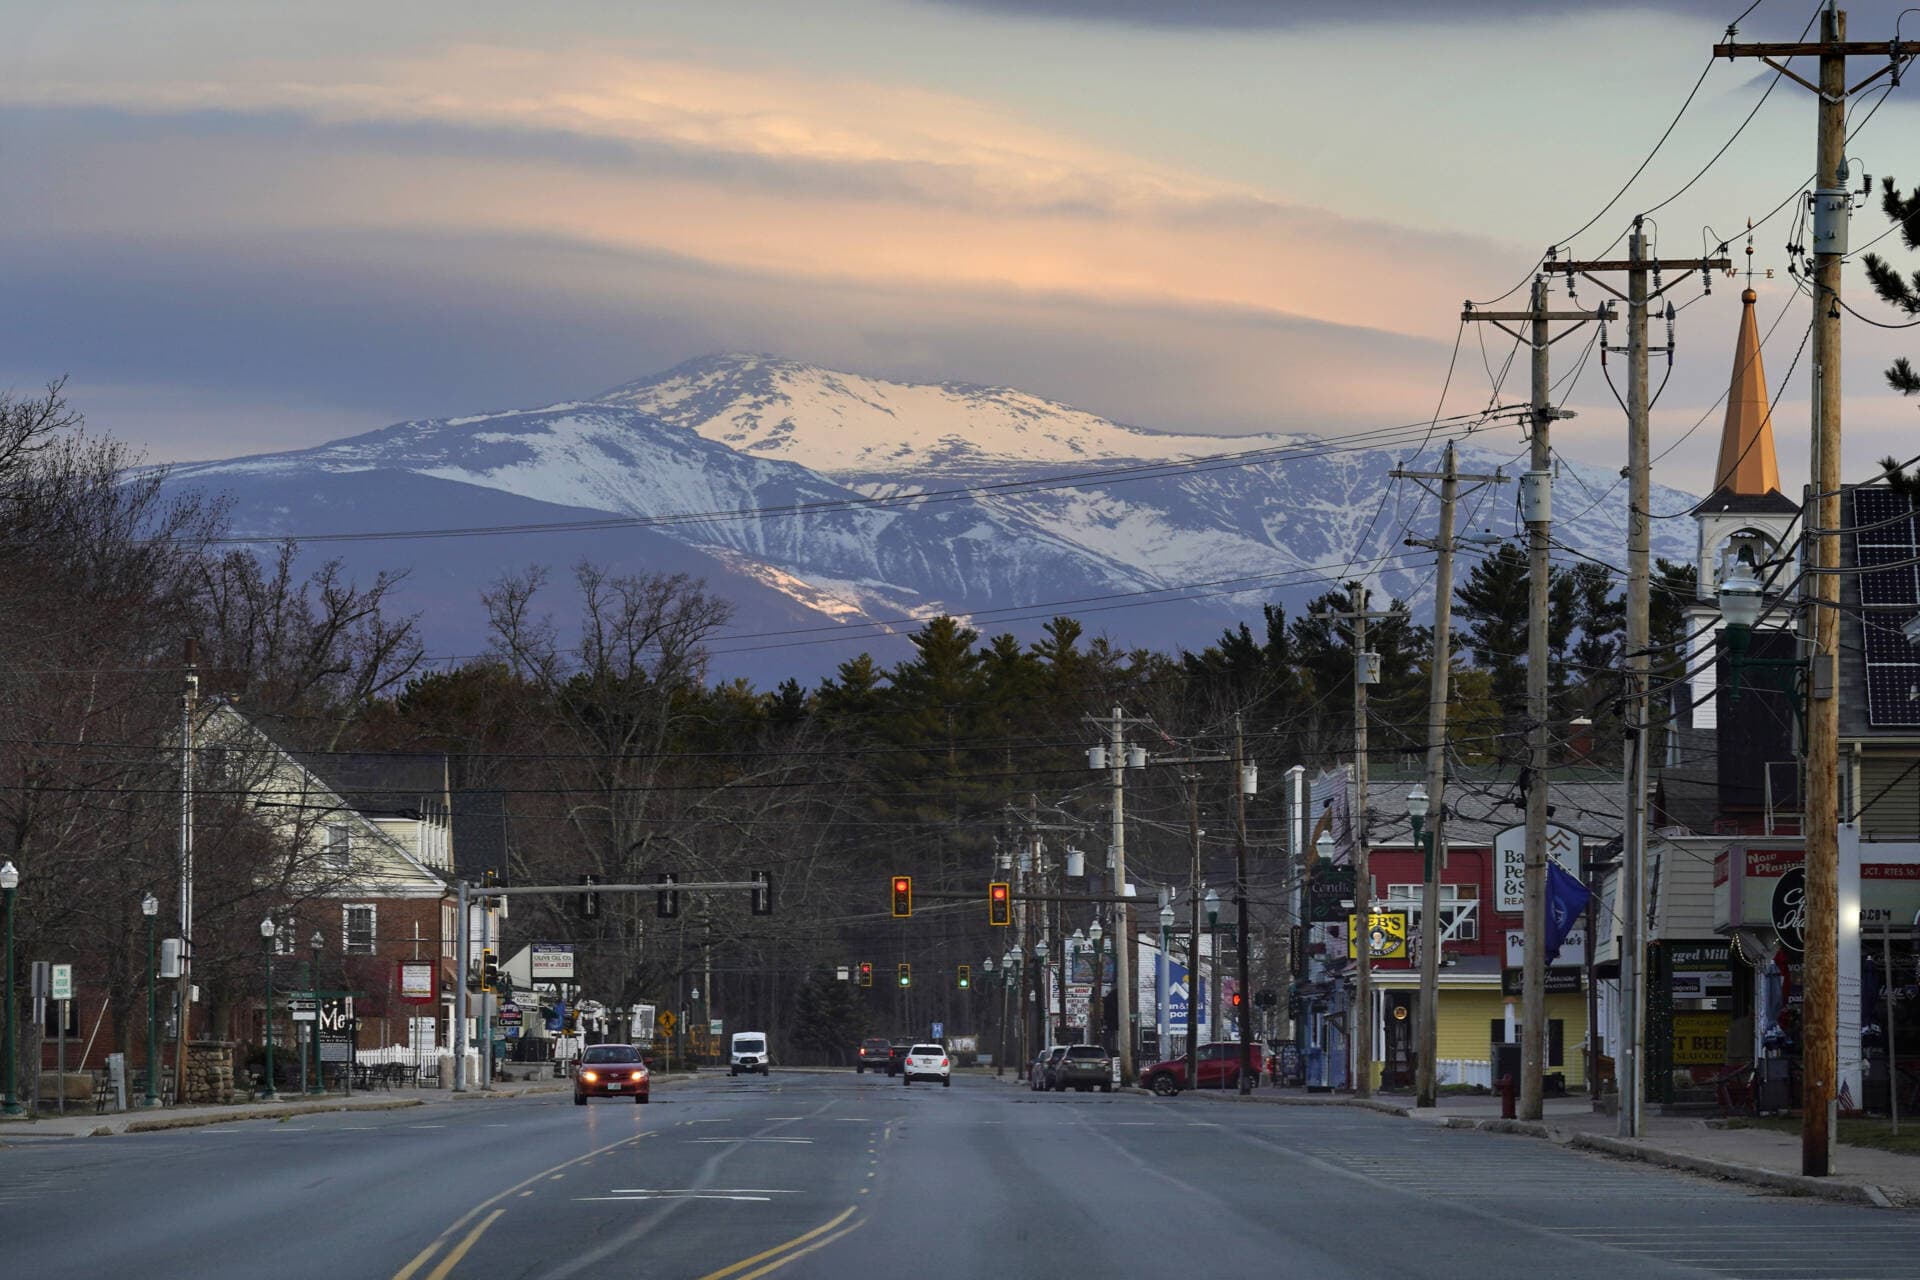 Mount Washington dominates the scene in this view of the business district in the village of North Conway, N.H., April 13. (Robert F. Bukaty/AP)